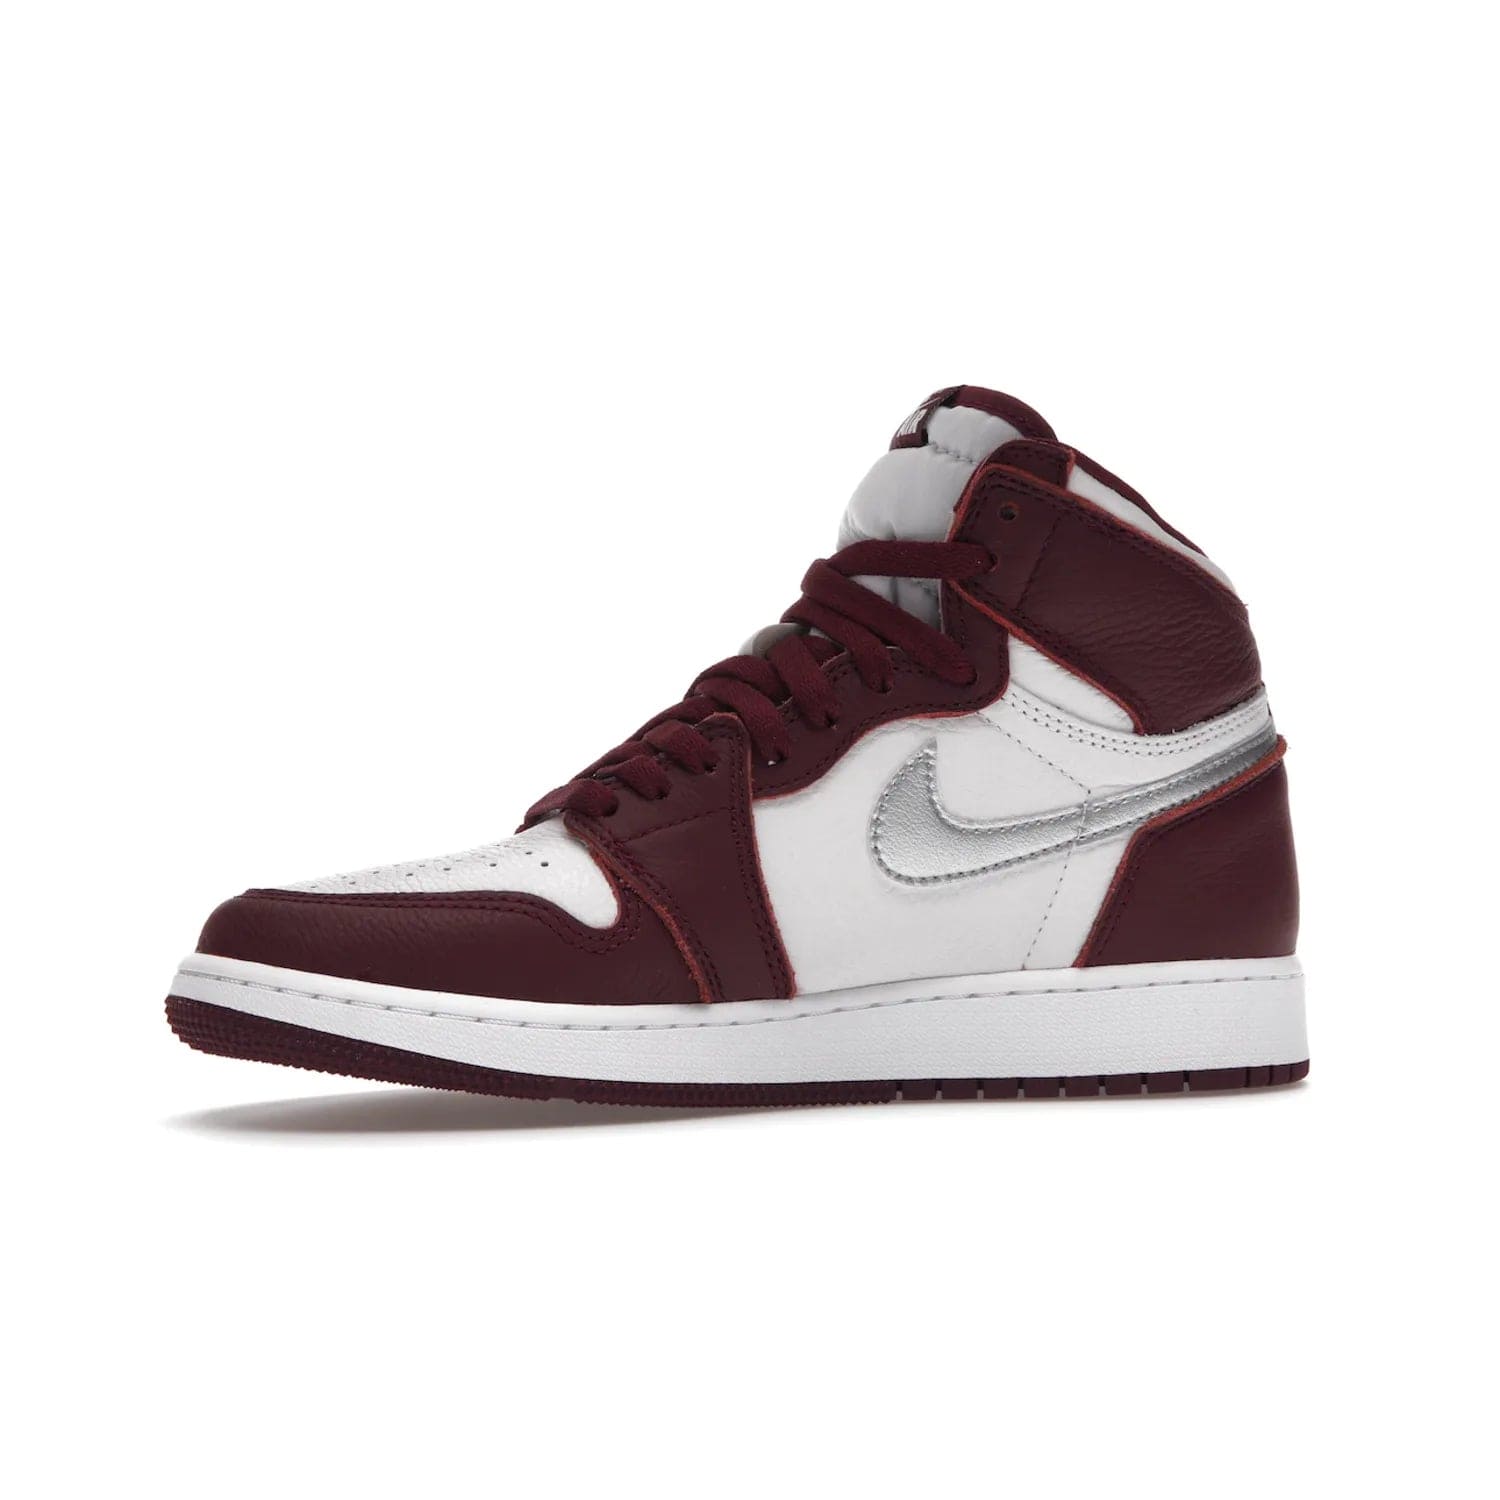 Jordan 1 Retro High OG Bordeaux (GS) - Image 17 - Only at www.BallersClubKickz.com - #
Introducing the Air Jordan 1 Retro High OG Bordeaux GS – a signature colorway part of the Jordan Brand Fall 2021 lineup. White leather upper & Bordeaux overlays, metallic silver swoosh, jeweled Air Jordan Wings logo & more. Step up your style game with this sleek fall season silhouette.